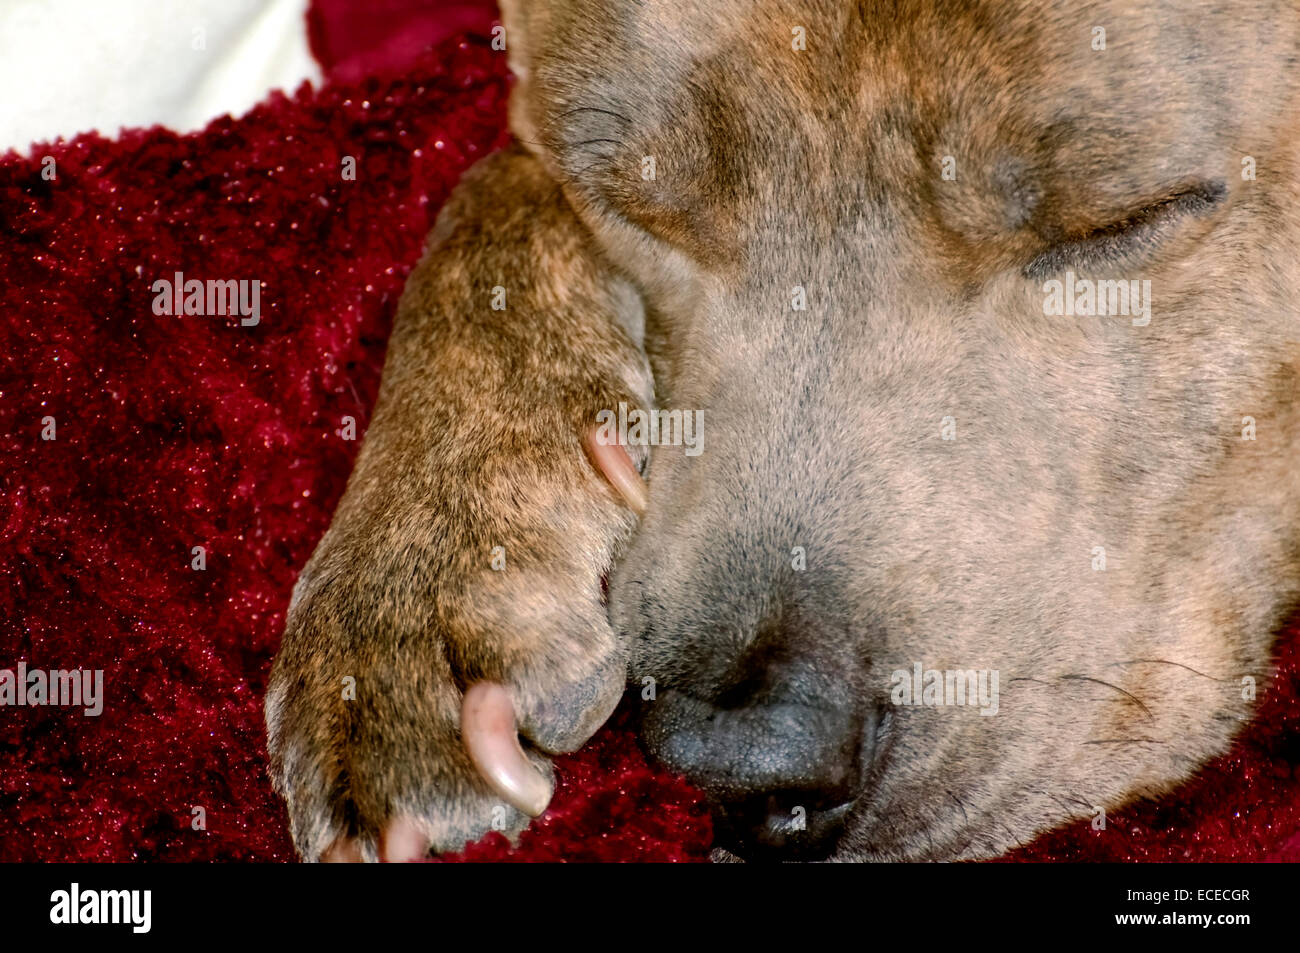 Close up of a sleep dog resting his head on his paw, sleeping on a red blanket. Stock Photo